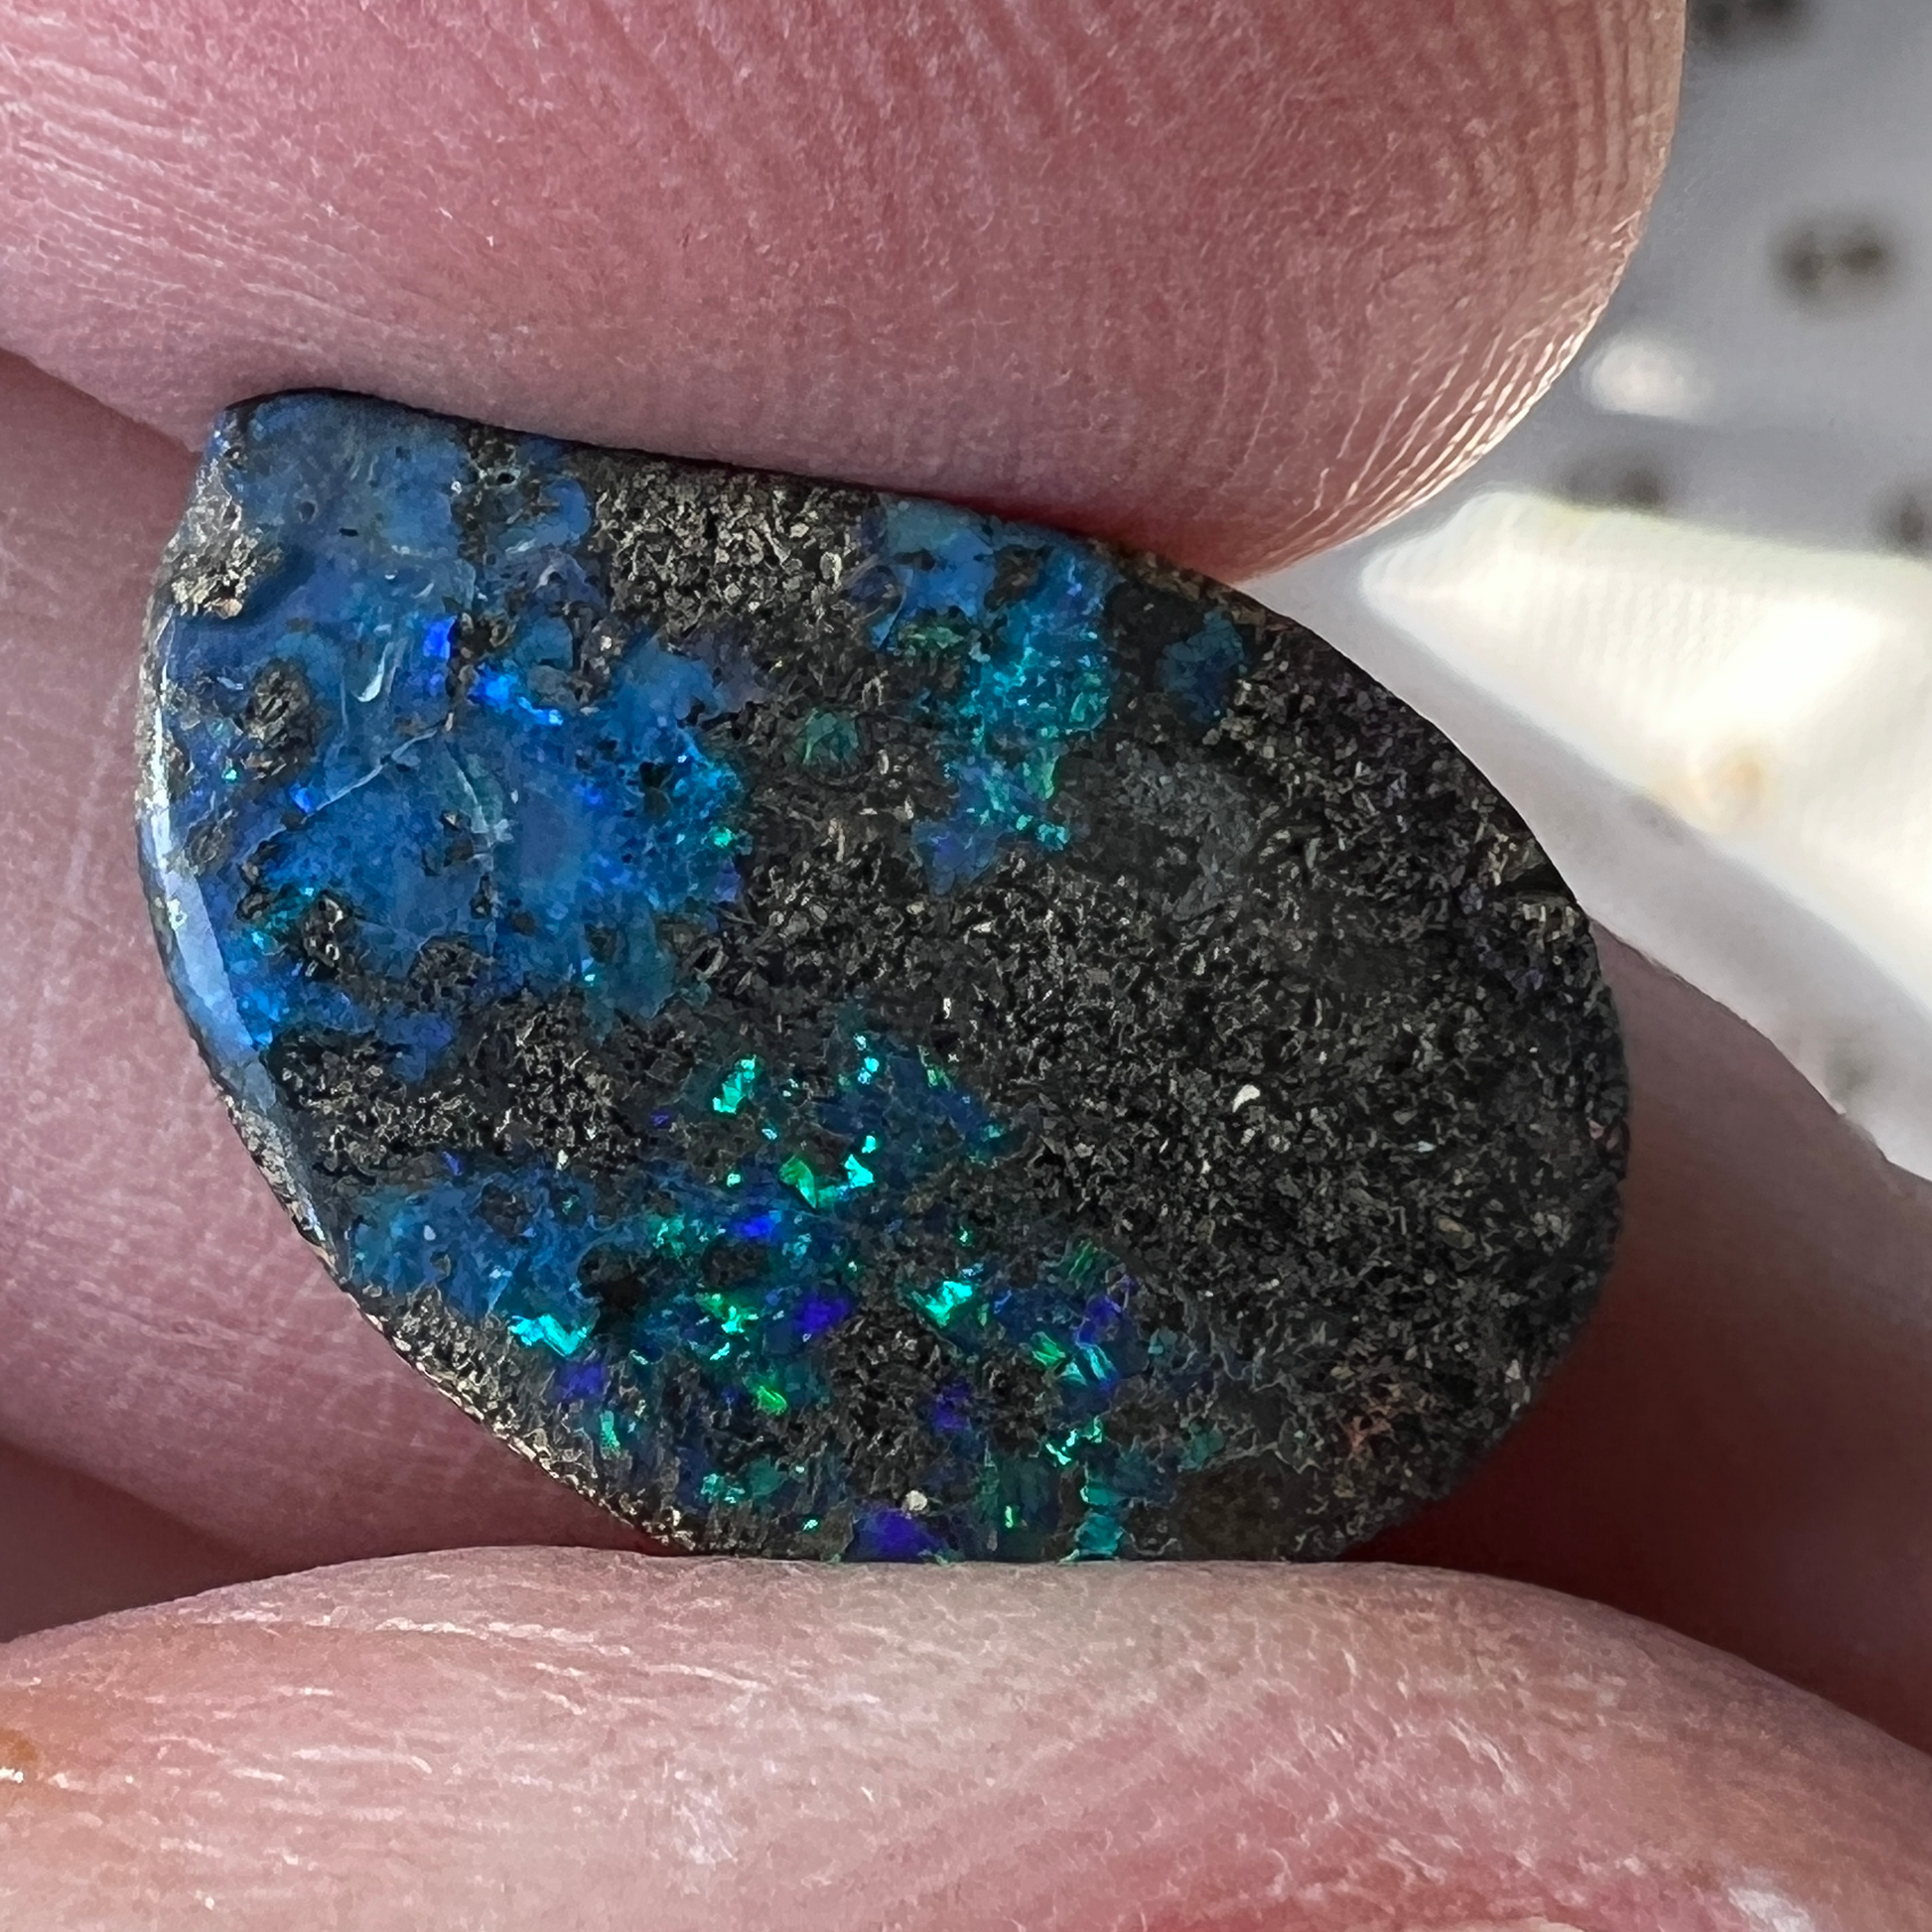 Winton boulder opal with lots of sparkle. Pretty blues and greens.